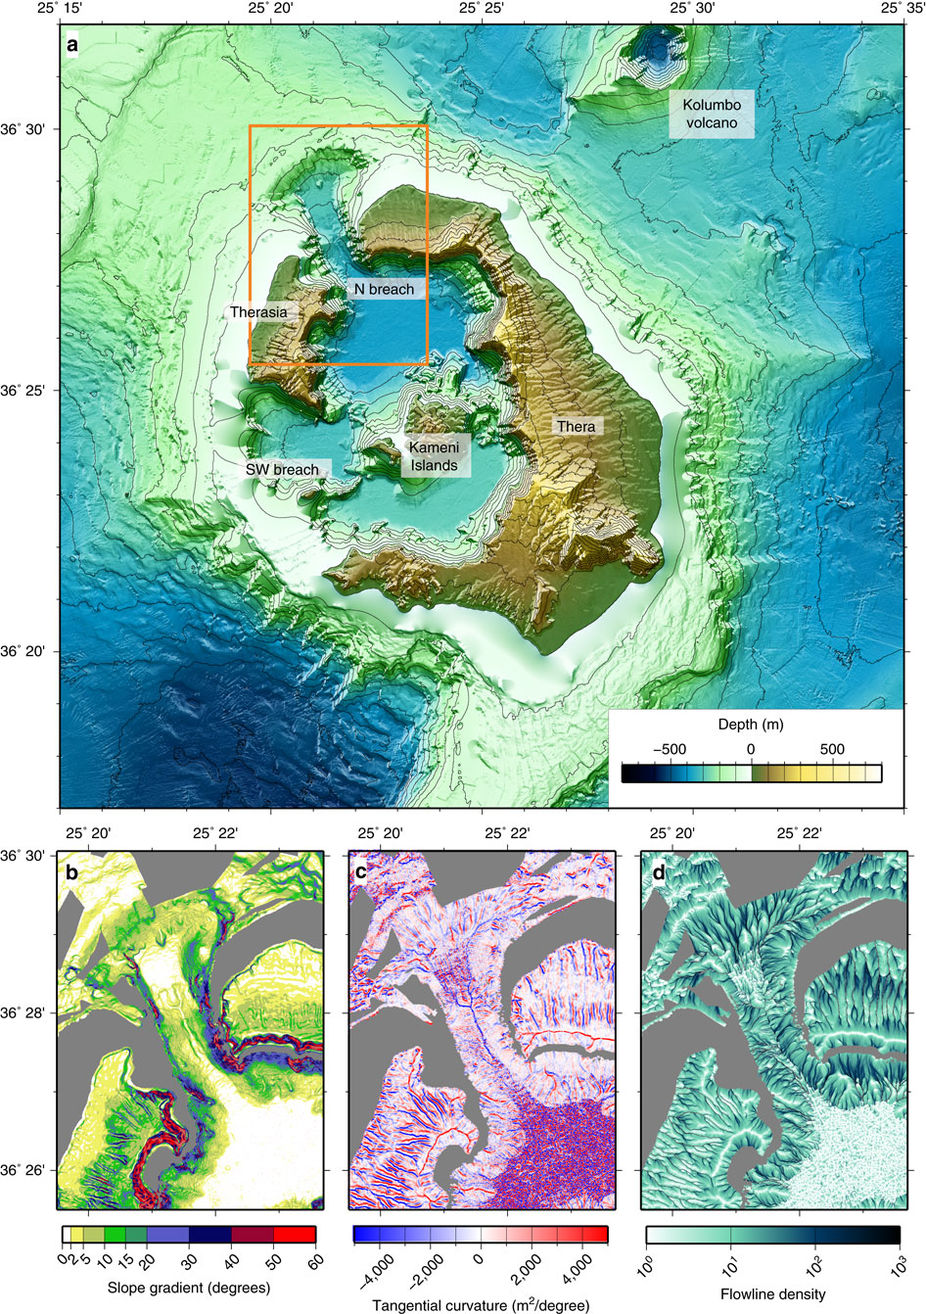 Topographic Features of the Santorini Onshore-Offshore Volcanic Field, Aegean Sea, Greece